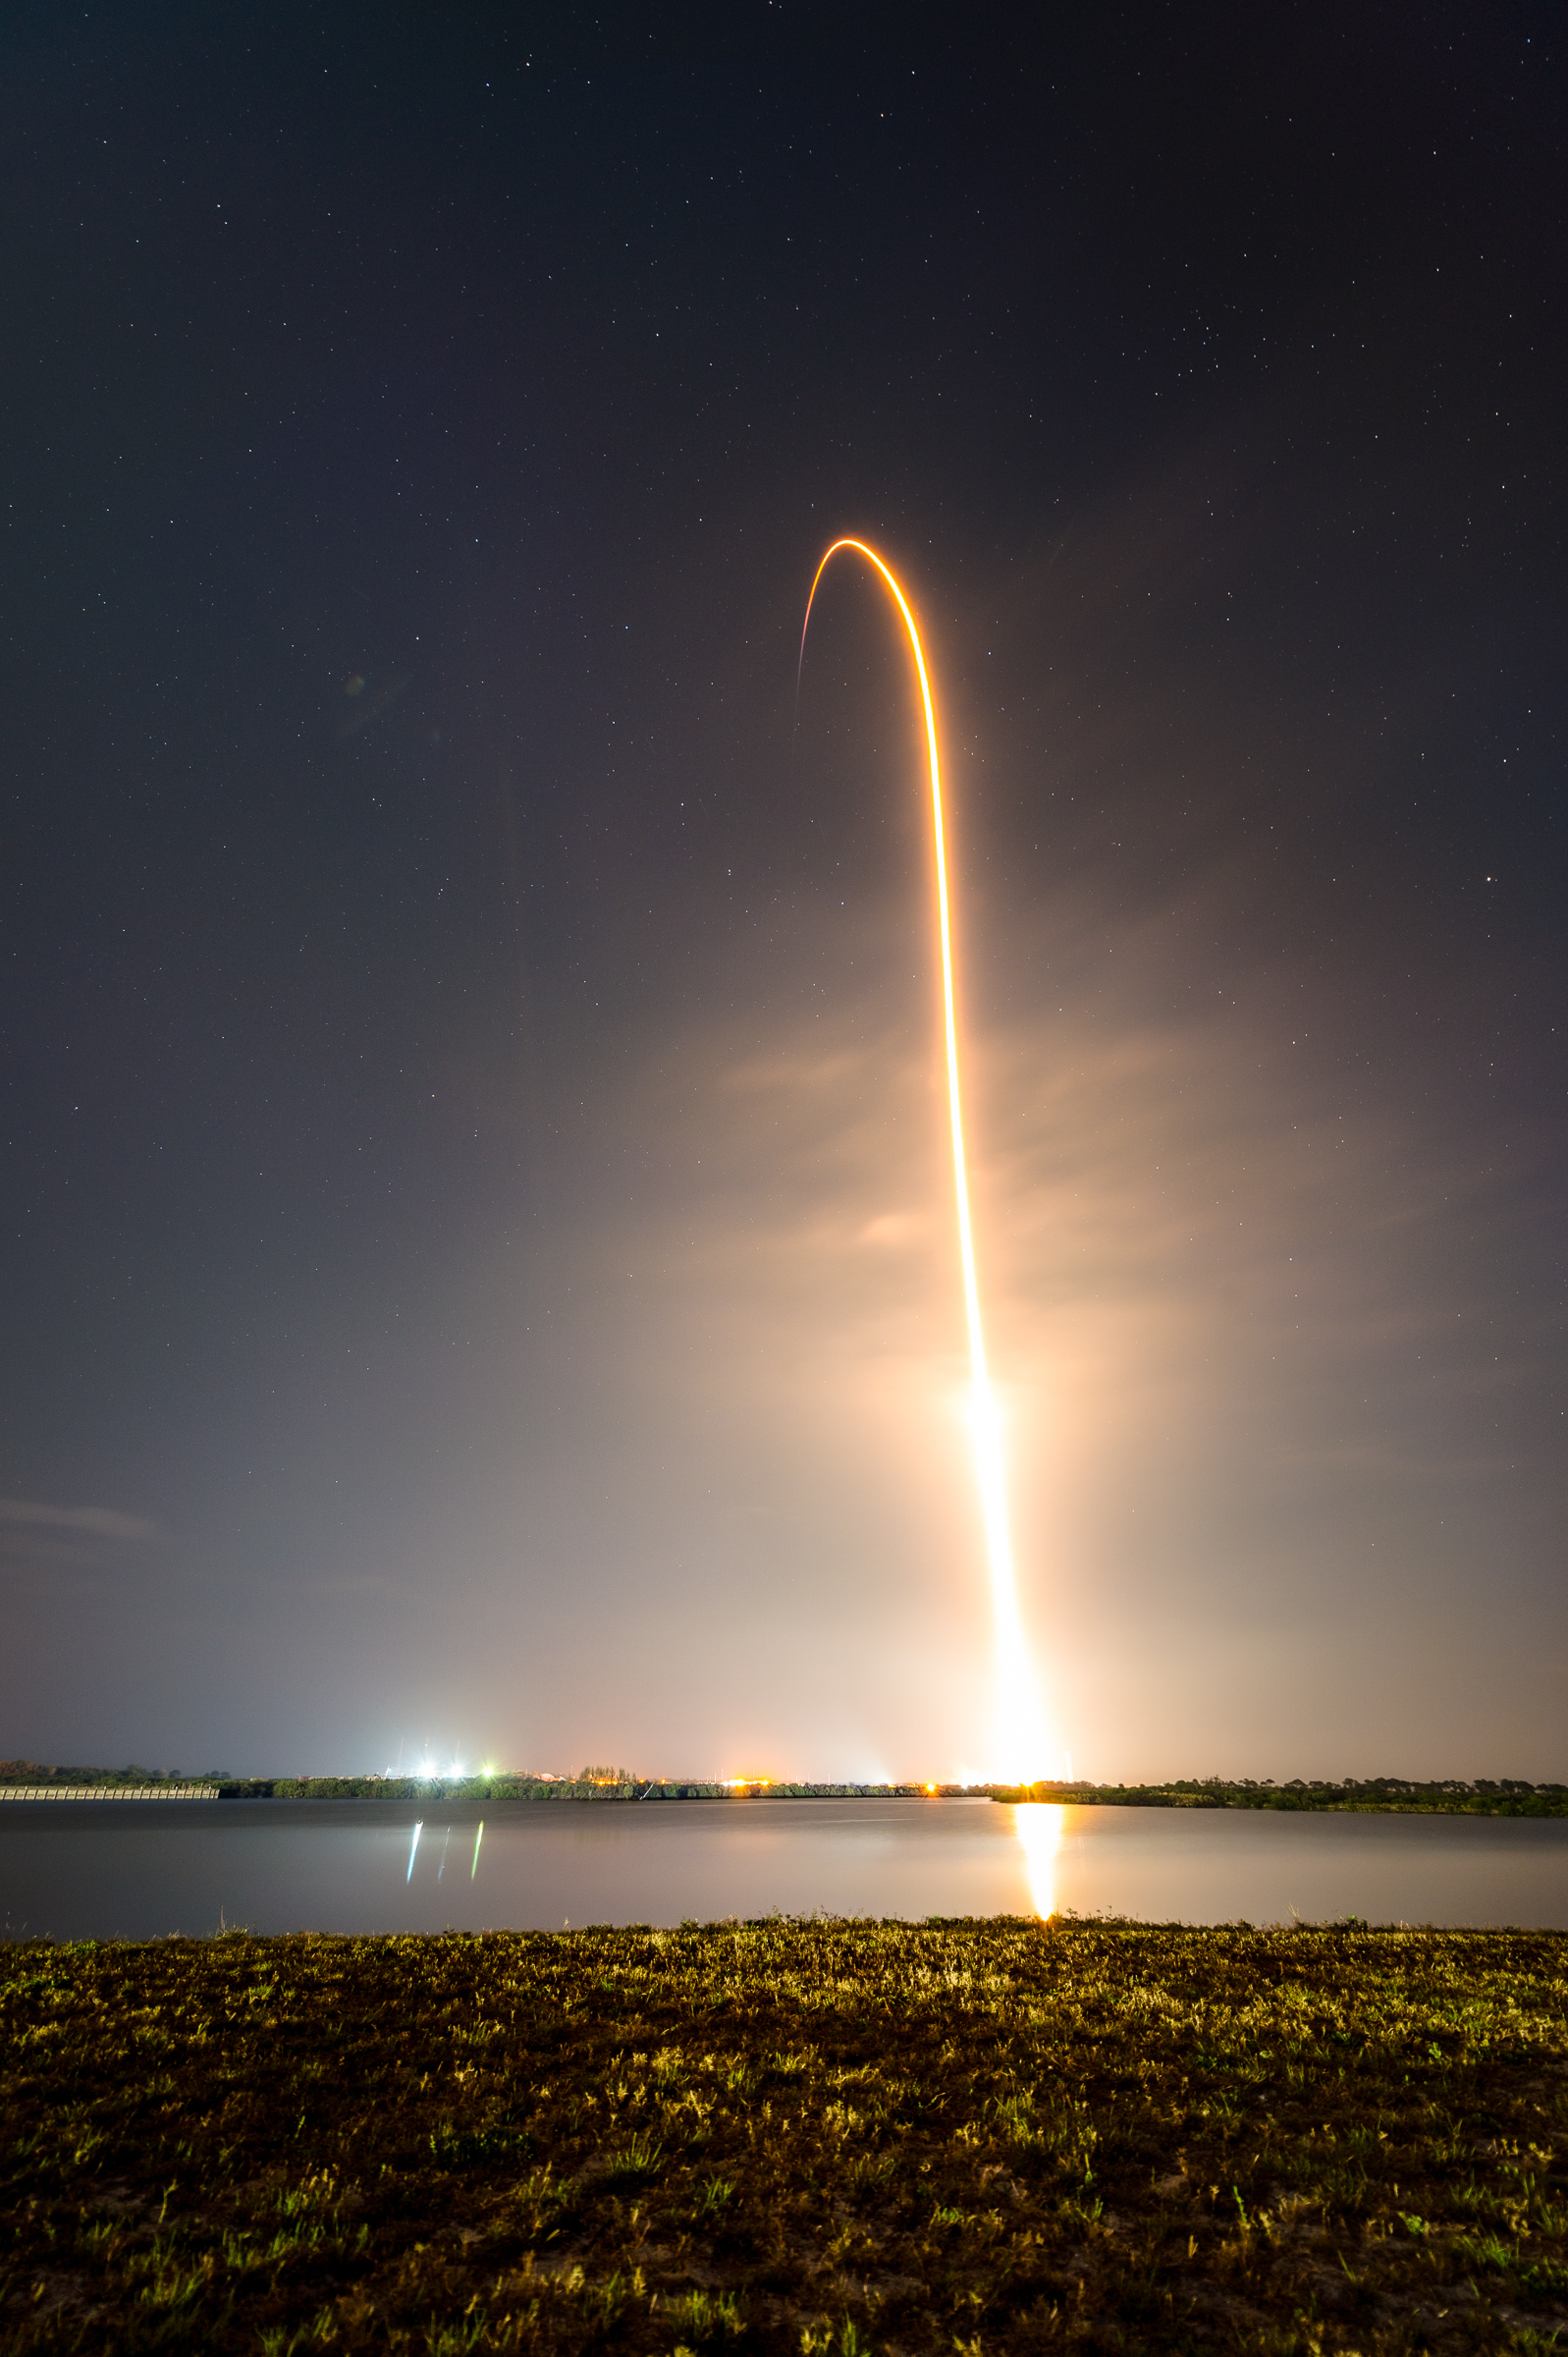 A long exposure of Falcon 9 and Crew Dragon lifting off from LC-39A. As seen from the Press Site lawn.